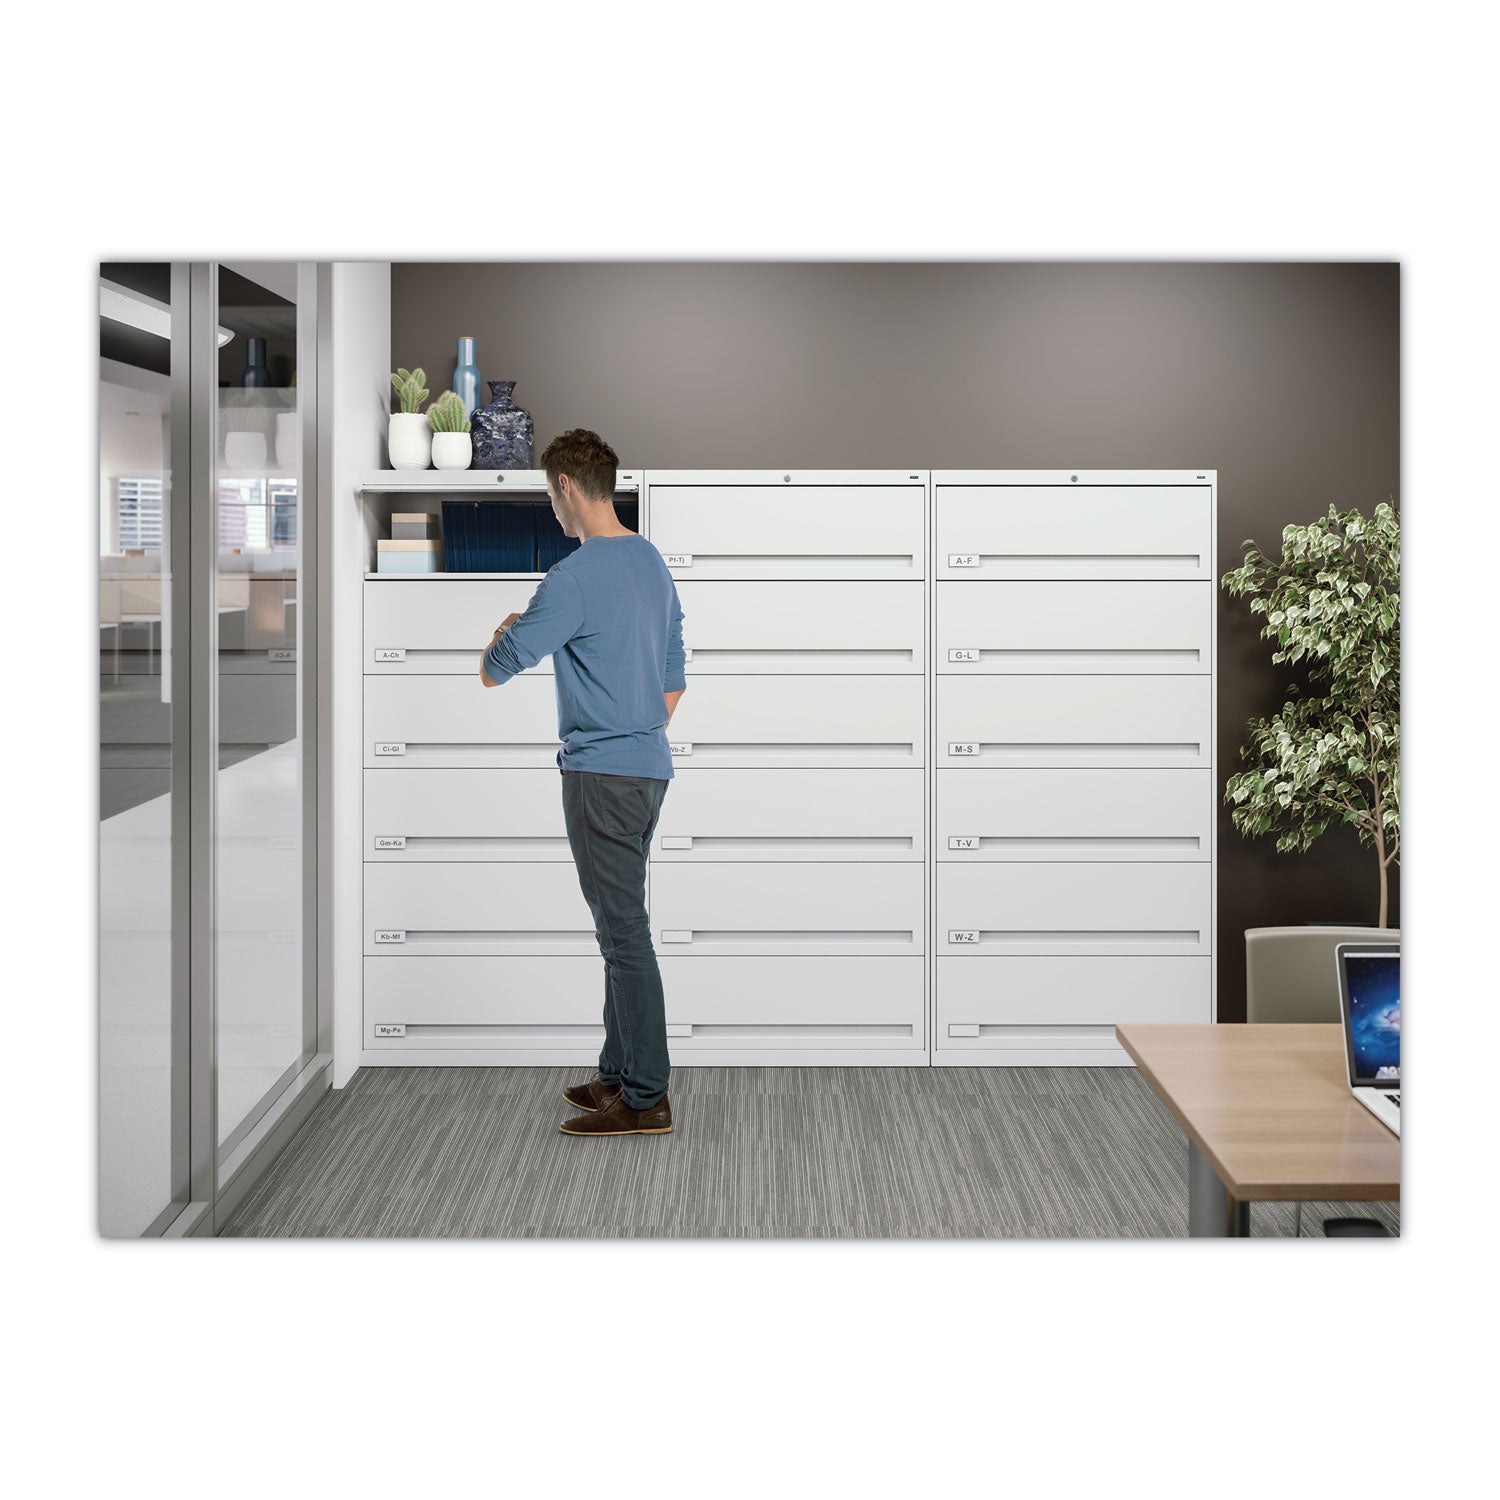 fixed-shelf-enclosed-format-lateral-file-for-end-tab-folders-7-legal-letter-file-shelves-light-gray-36-x-165-x-87_tnnfs371llgy - 2